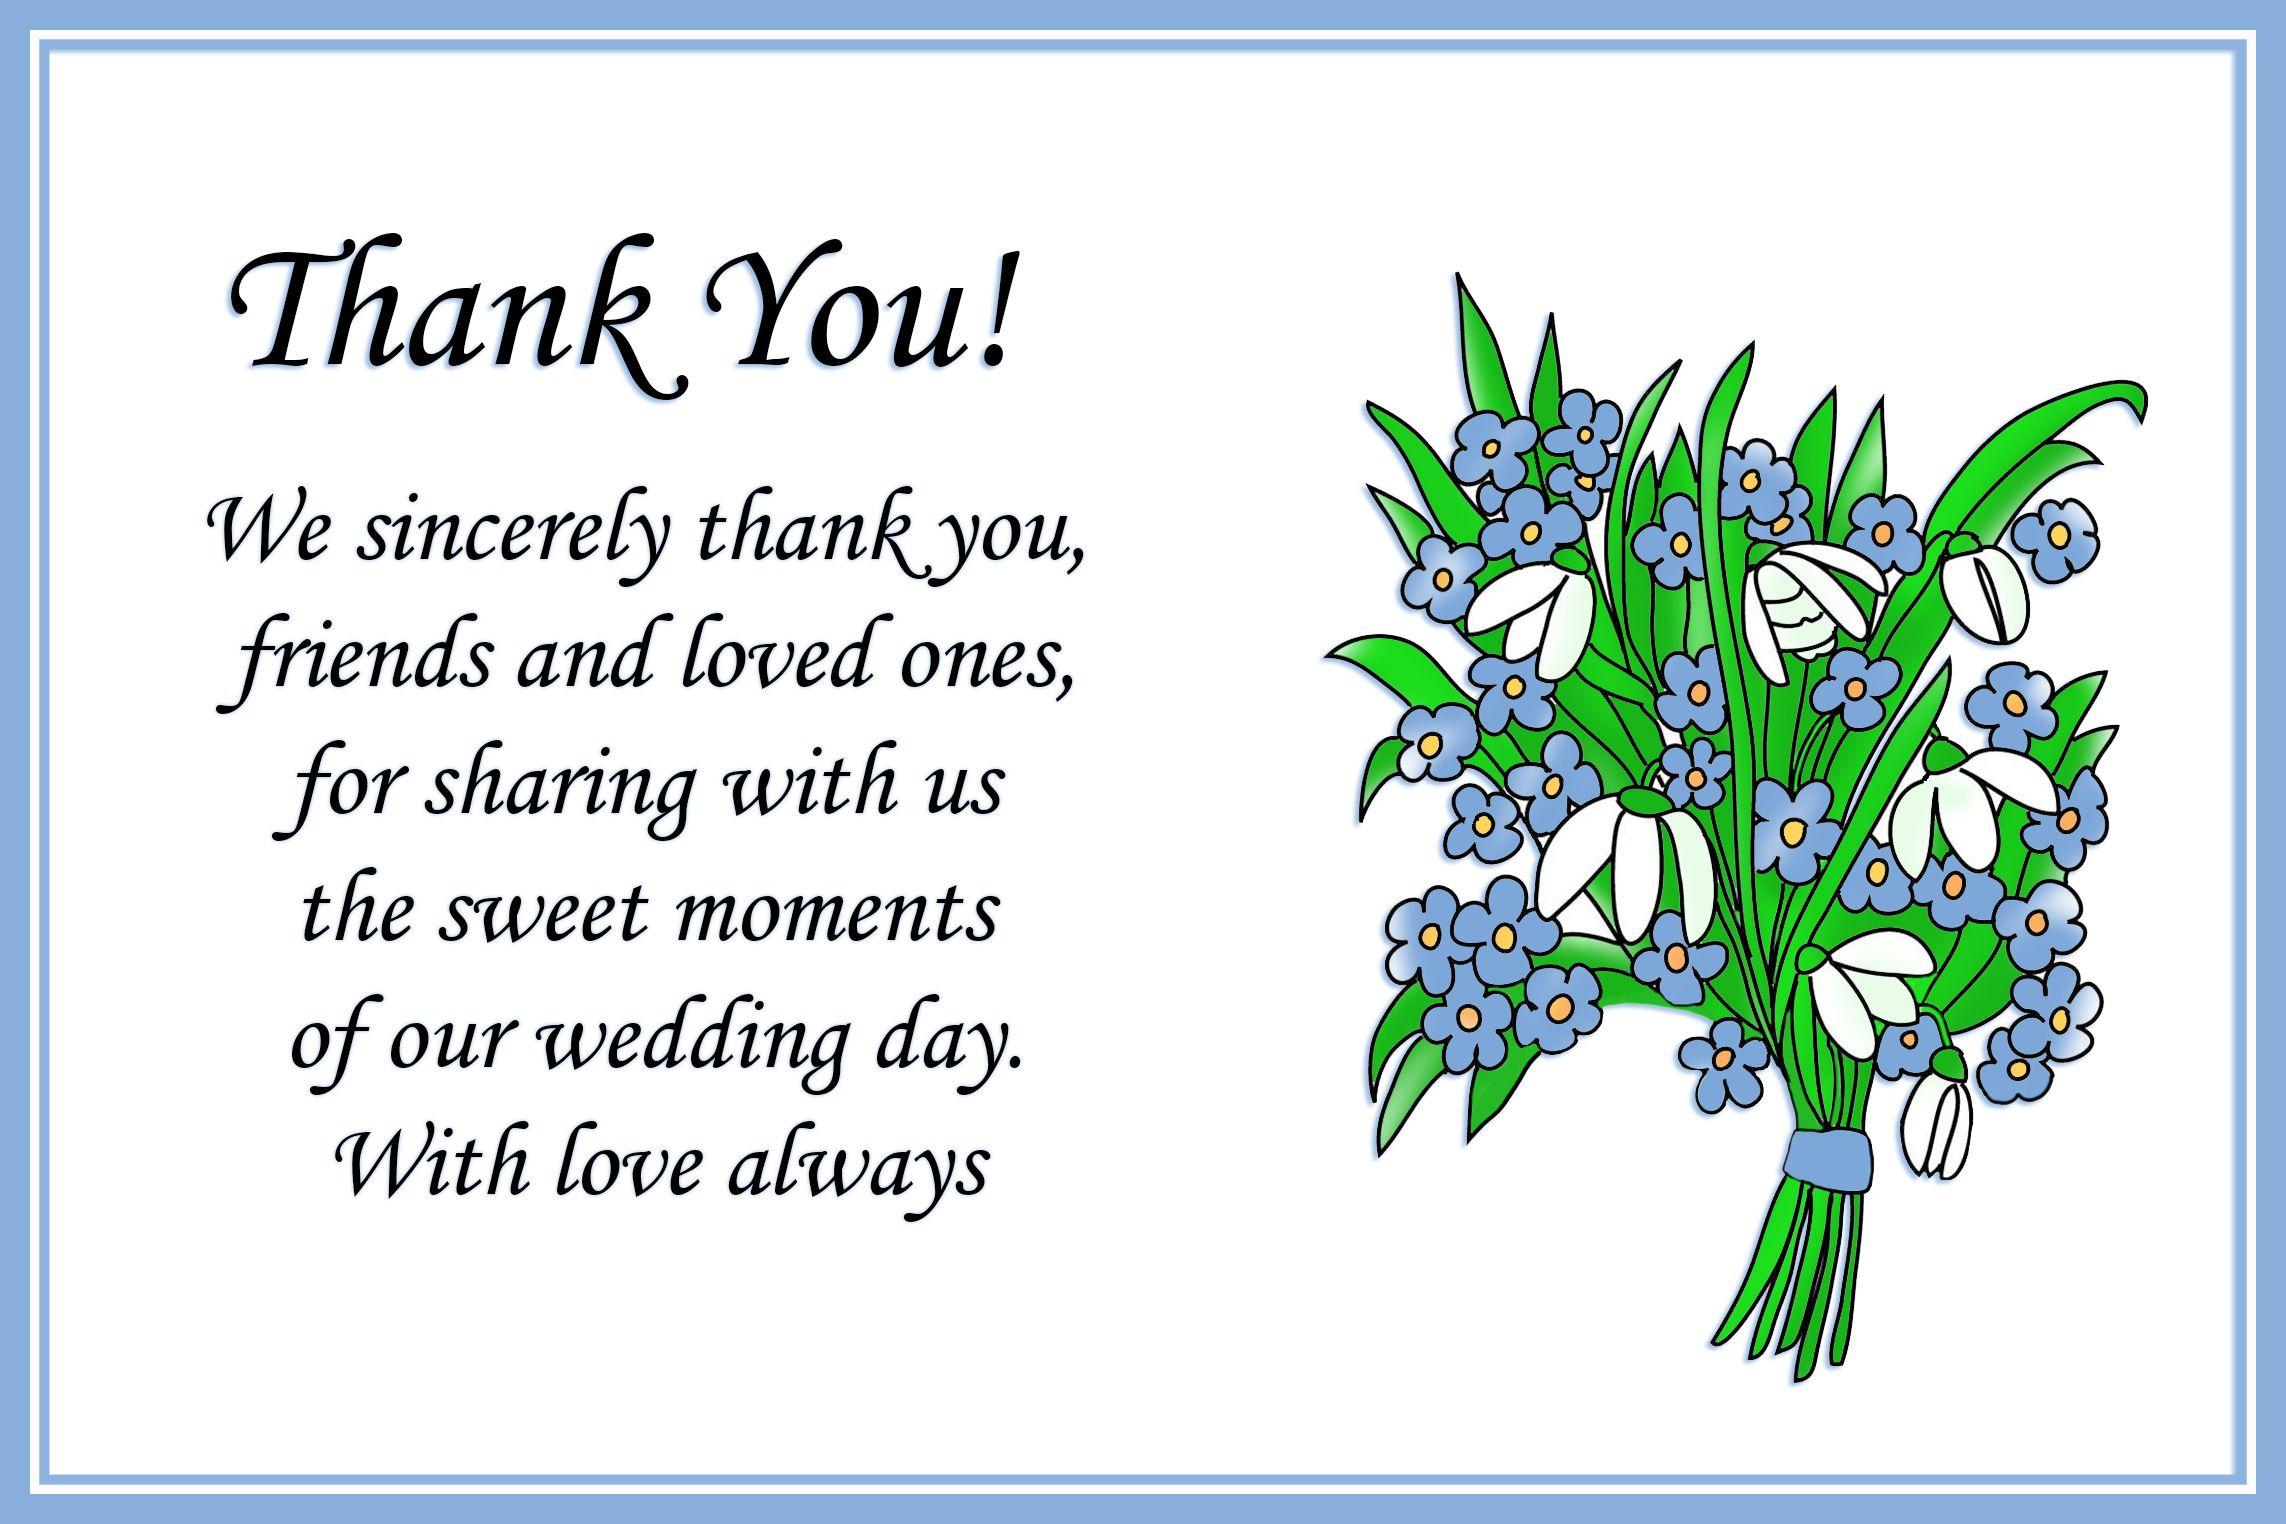 A Special Thanks to You for Taking Part In Our Wedding Day and